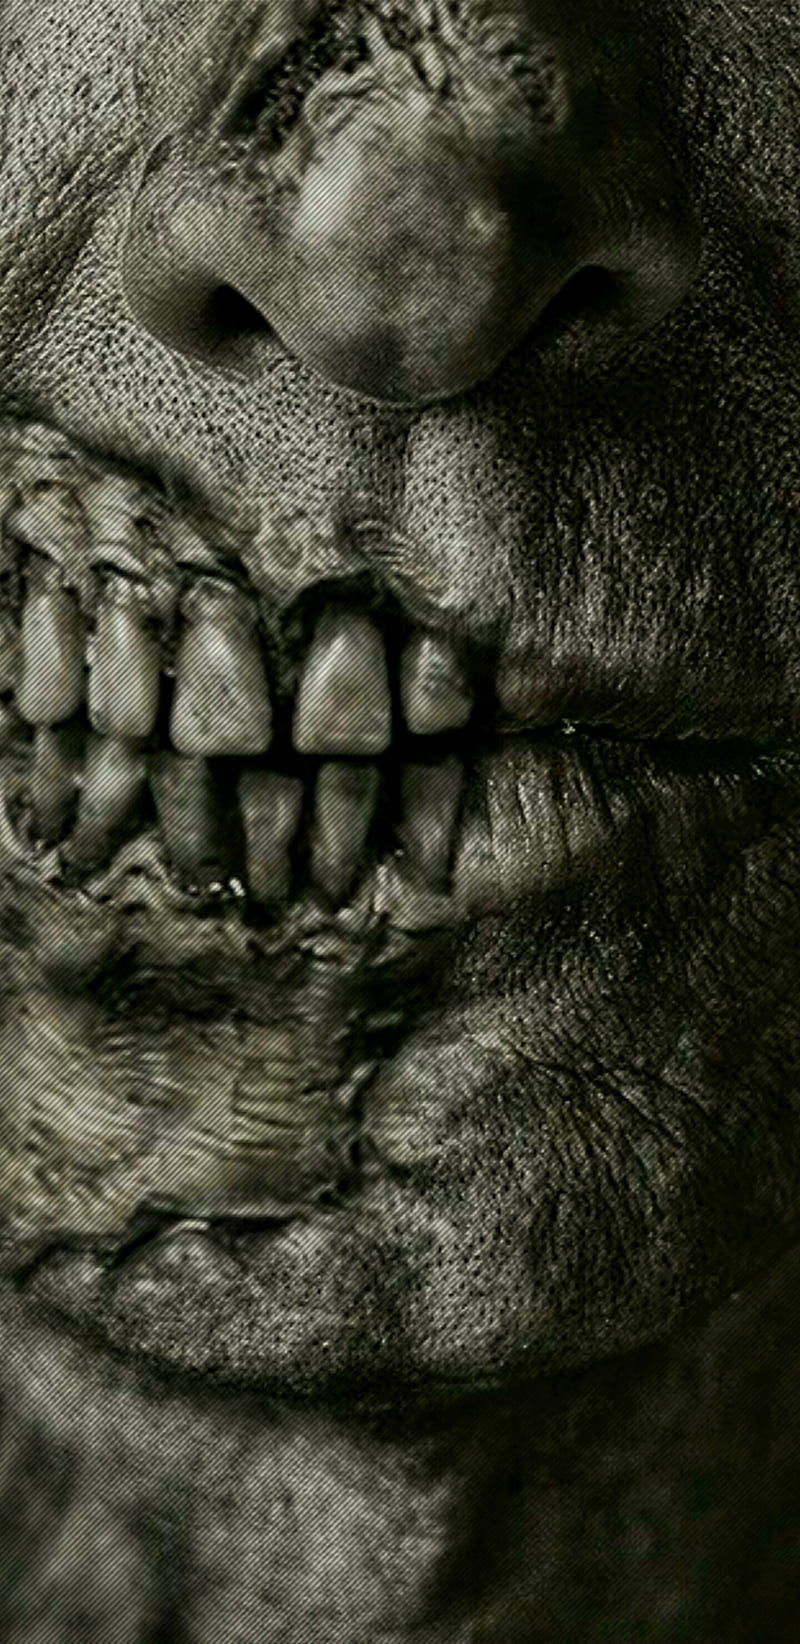 Horrible Mouth, planet, guerra, clans, mask, terror, clash, horror, scared, HD phone wallpaper